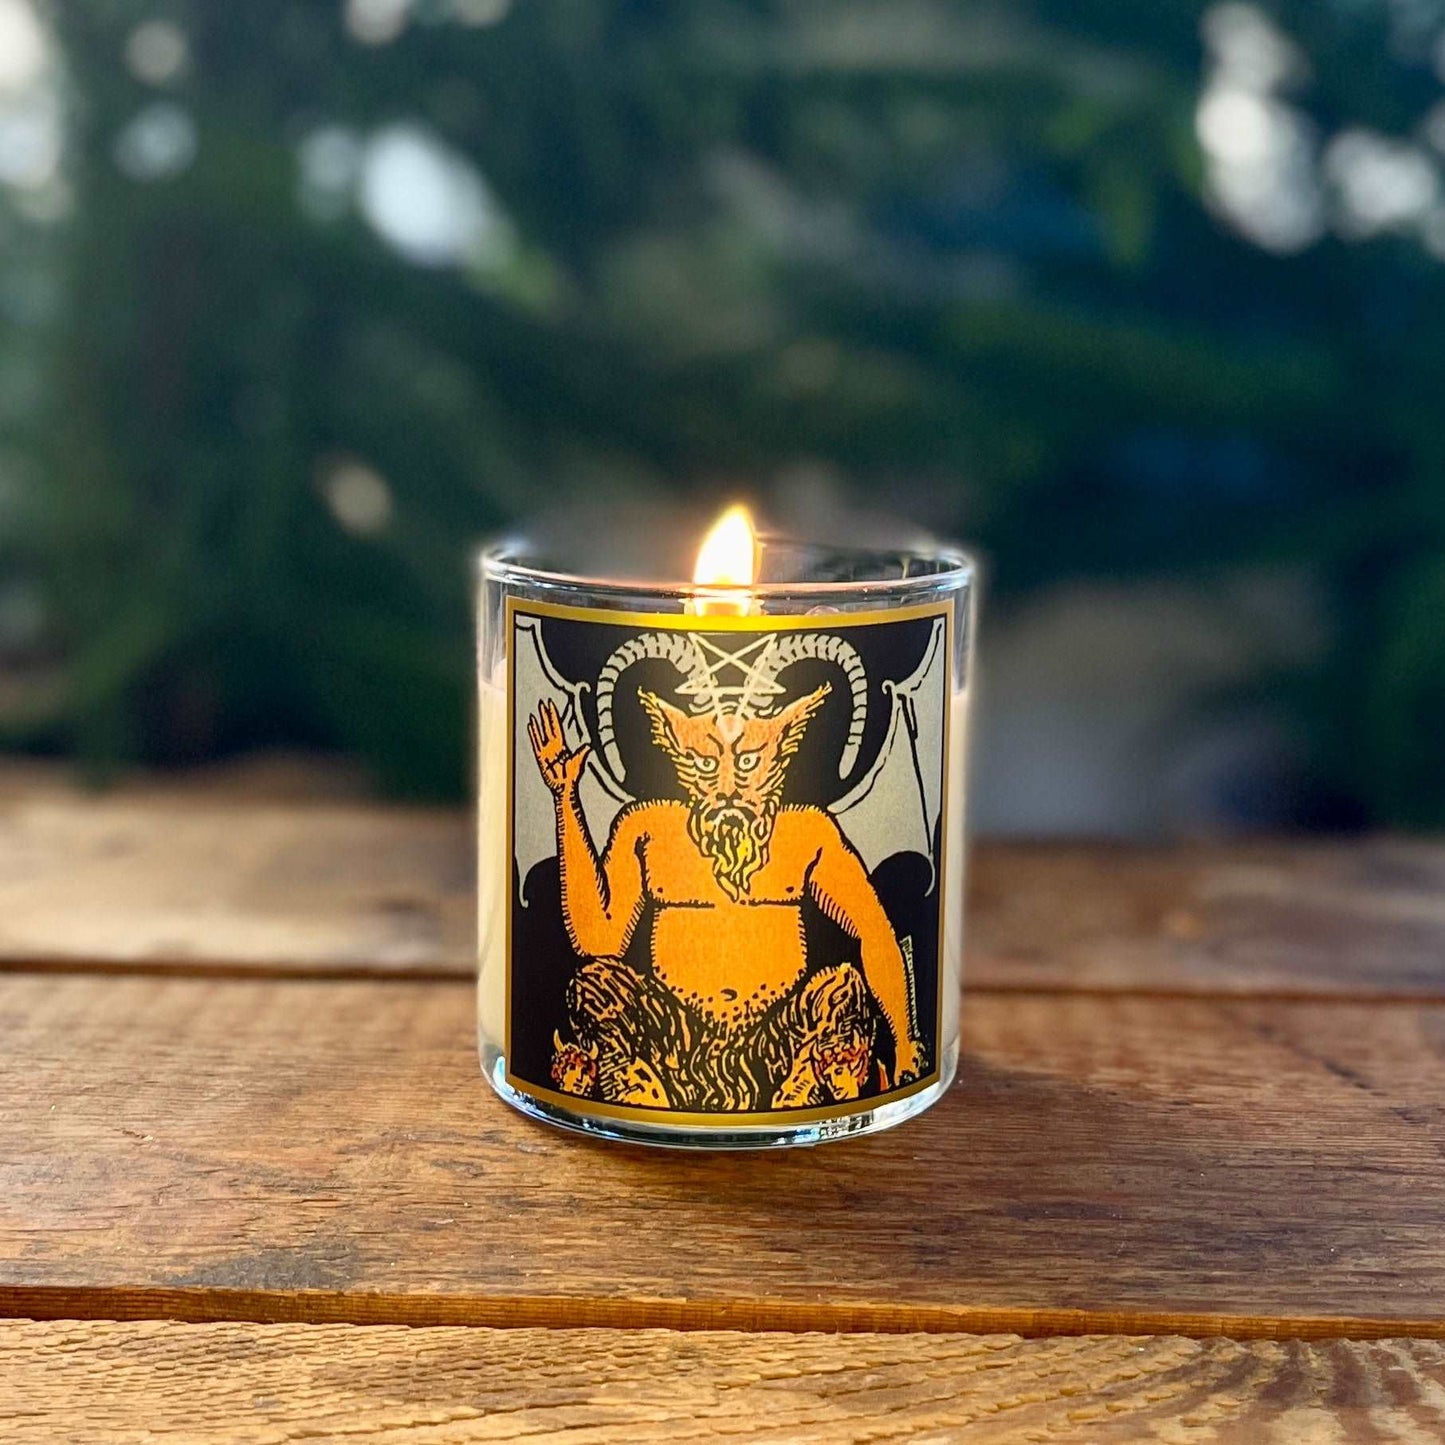 8.5 oz Natural GMM-Free Soy Wax The Devil Tarot Candle for Strength, Resilience, and Aromatherapy with Organic Orange, Cedar, Pine Essential Oils and Amethyst Crystal